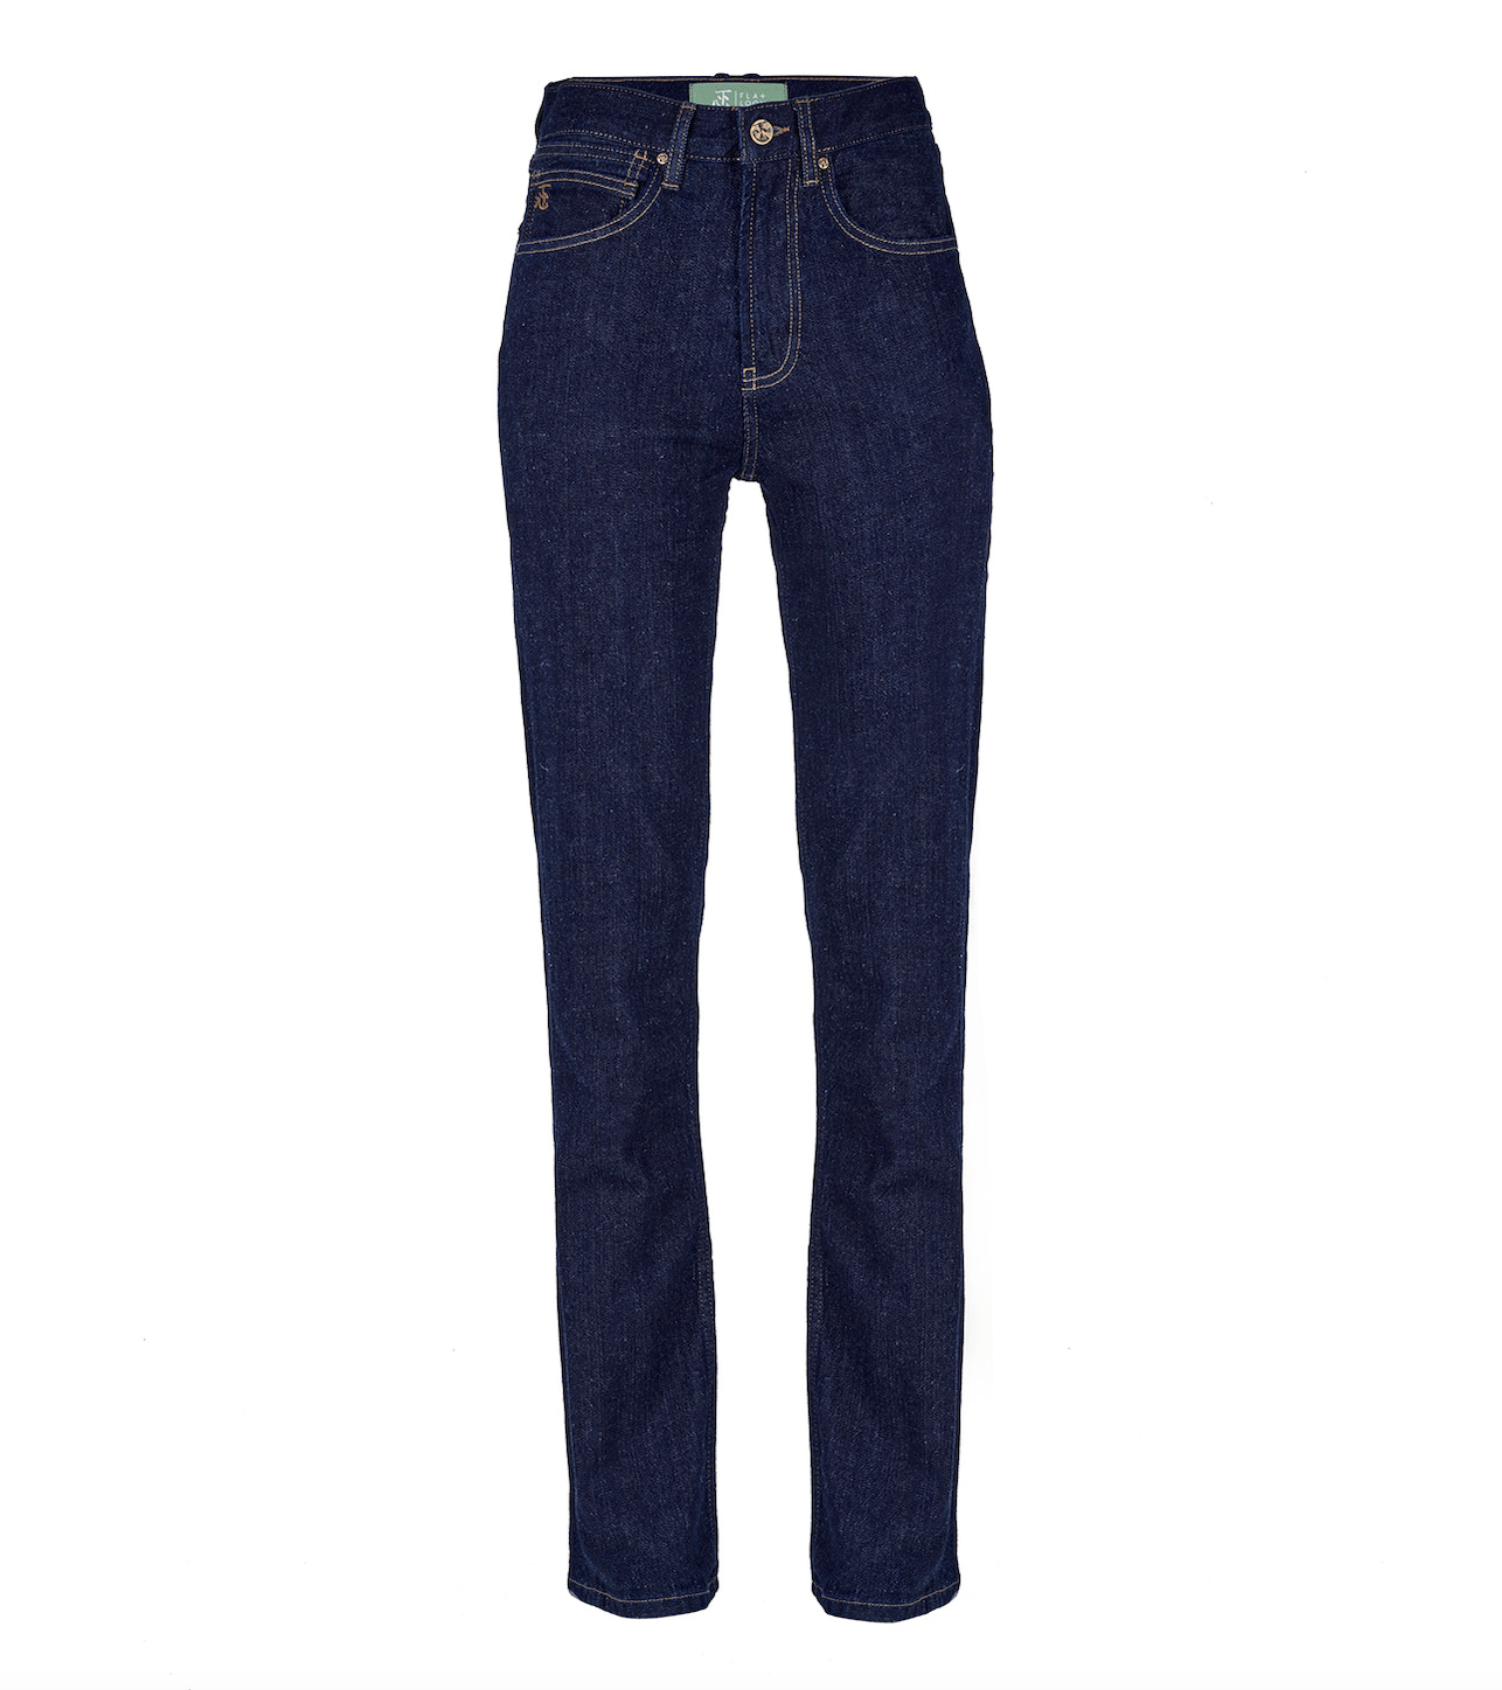 Flax and Loom SALE Indigo Lucille Rinse Tapered Jeans